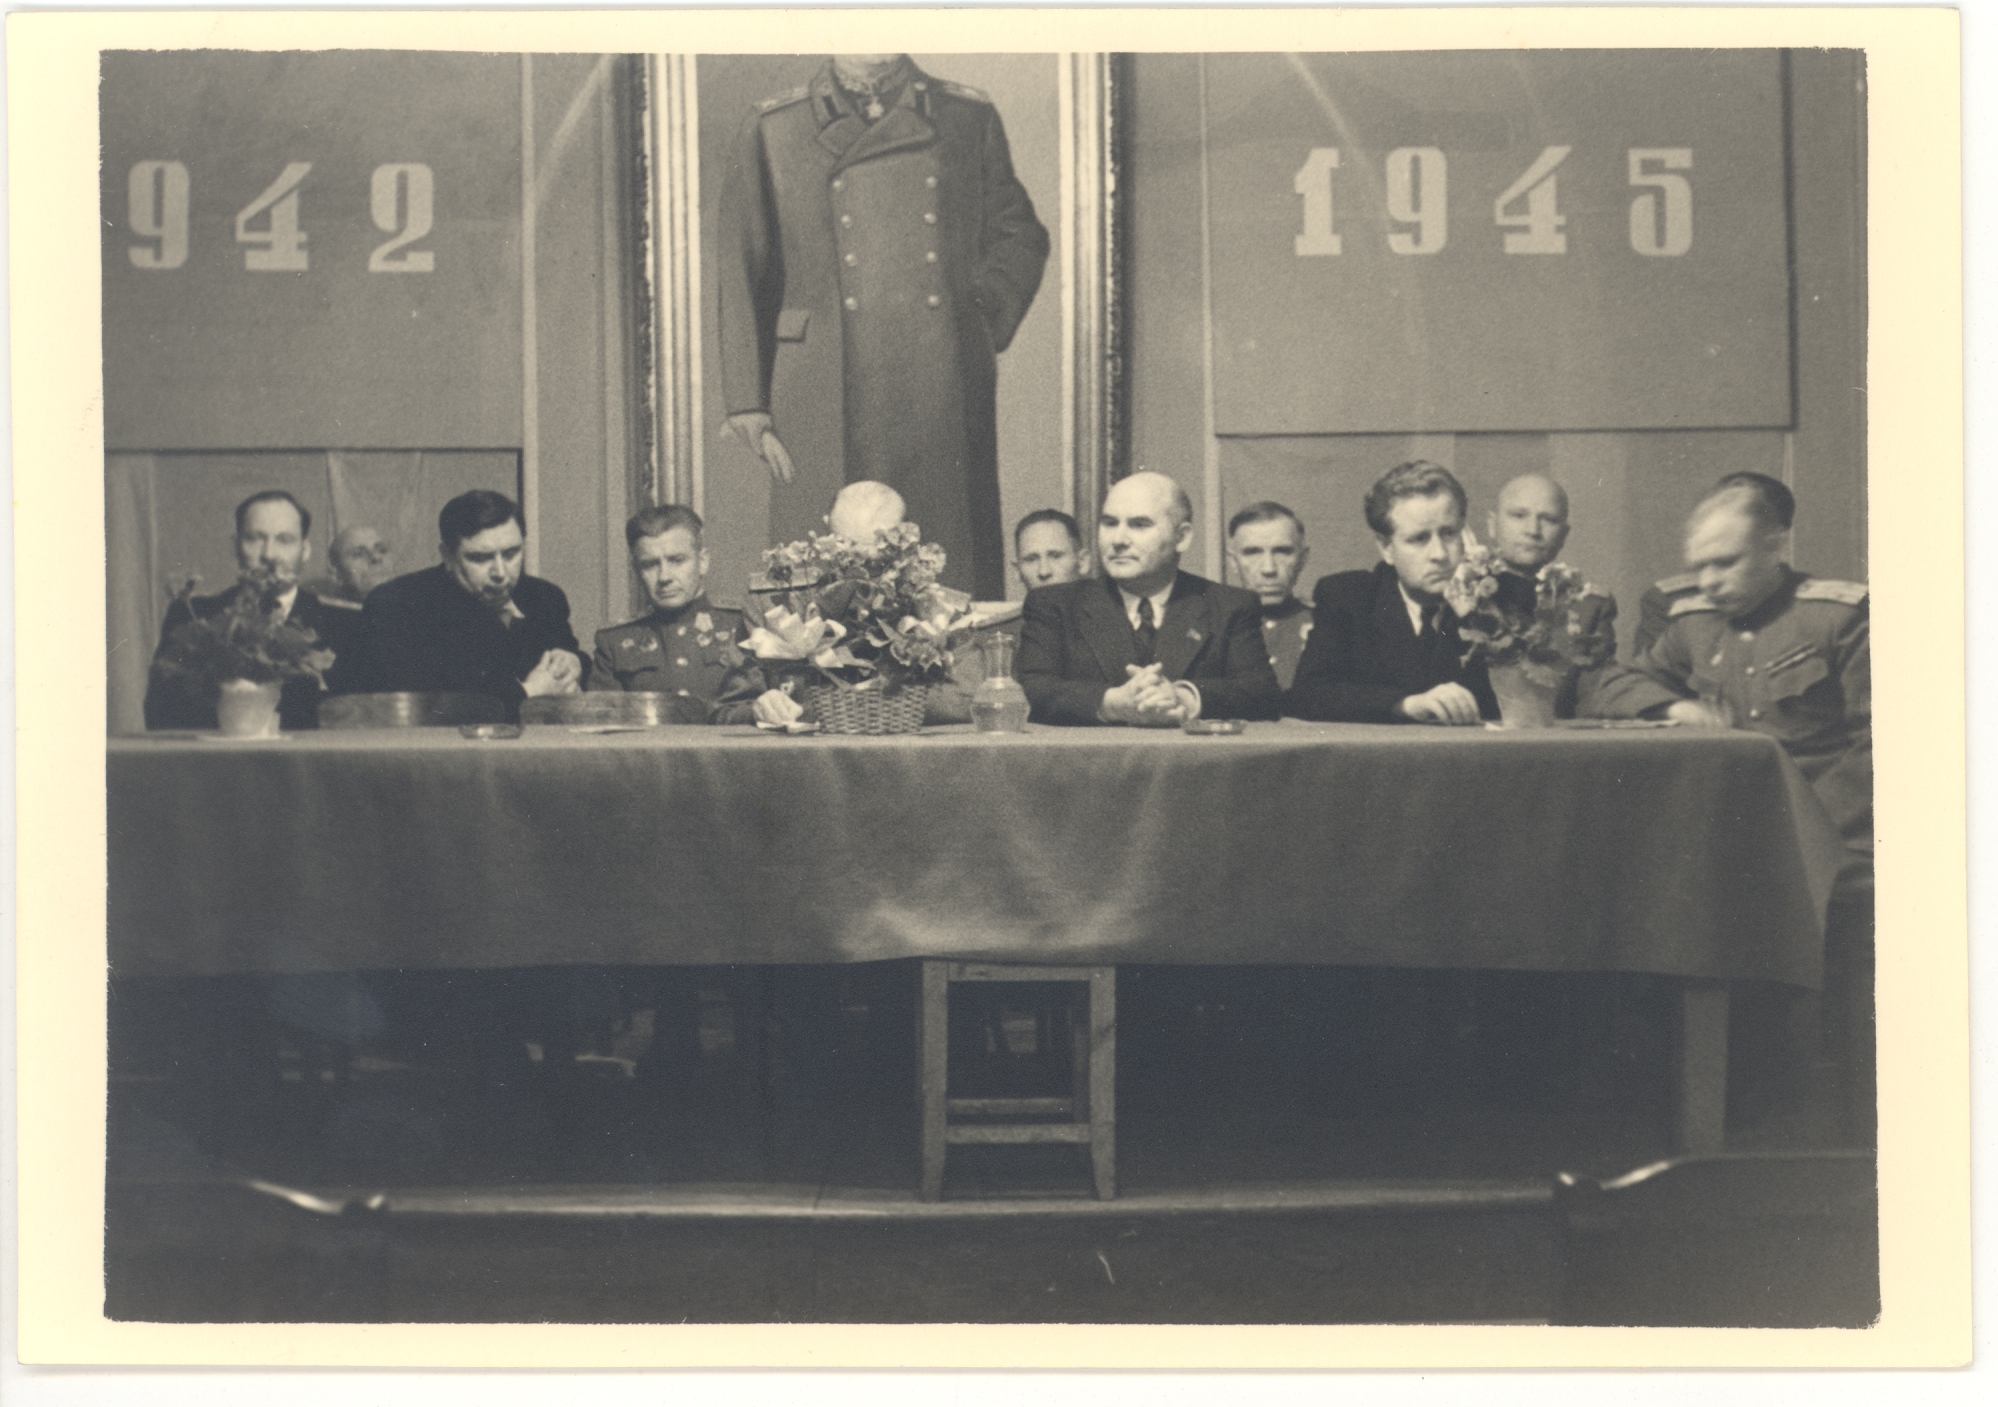 President of the 3rd anniversary of the formal meeting of the Estonian Corps. 1945. In front plan right: 1. E. Pull, 2. N. Stretch, 3. J. Vares-Barbarus, 3. 4. 5. A. Veimer